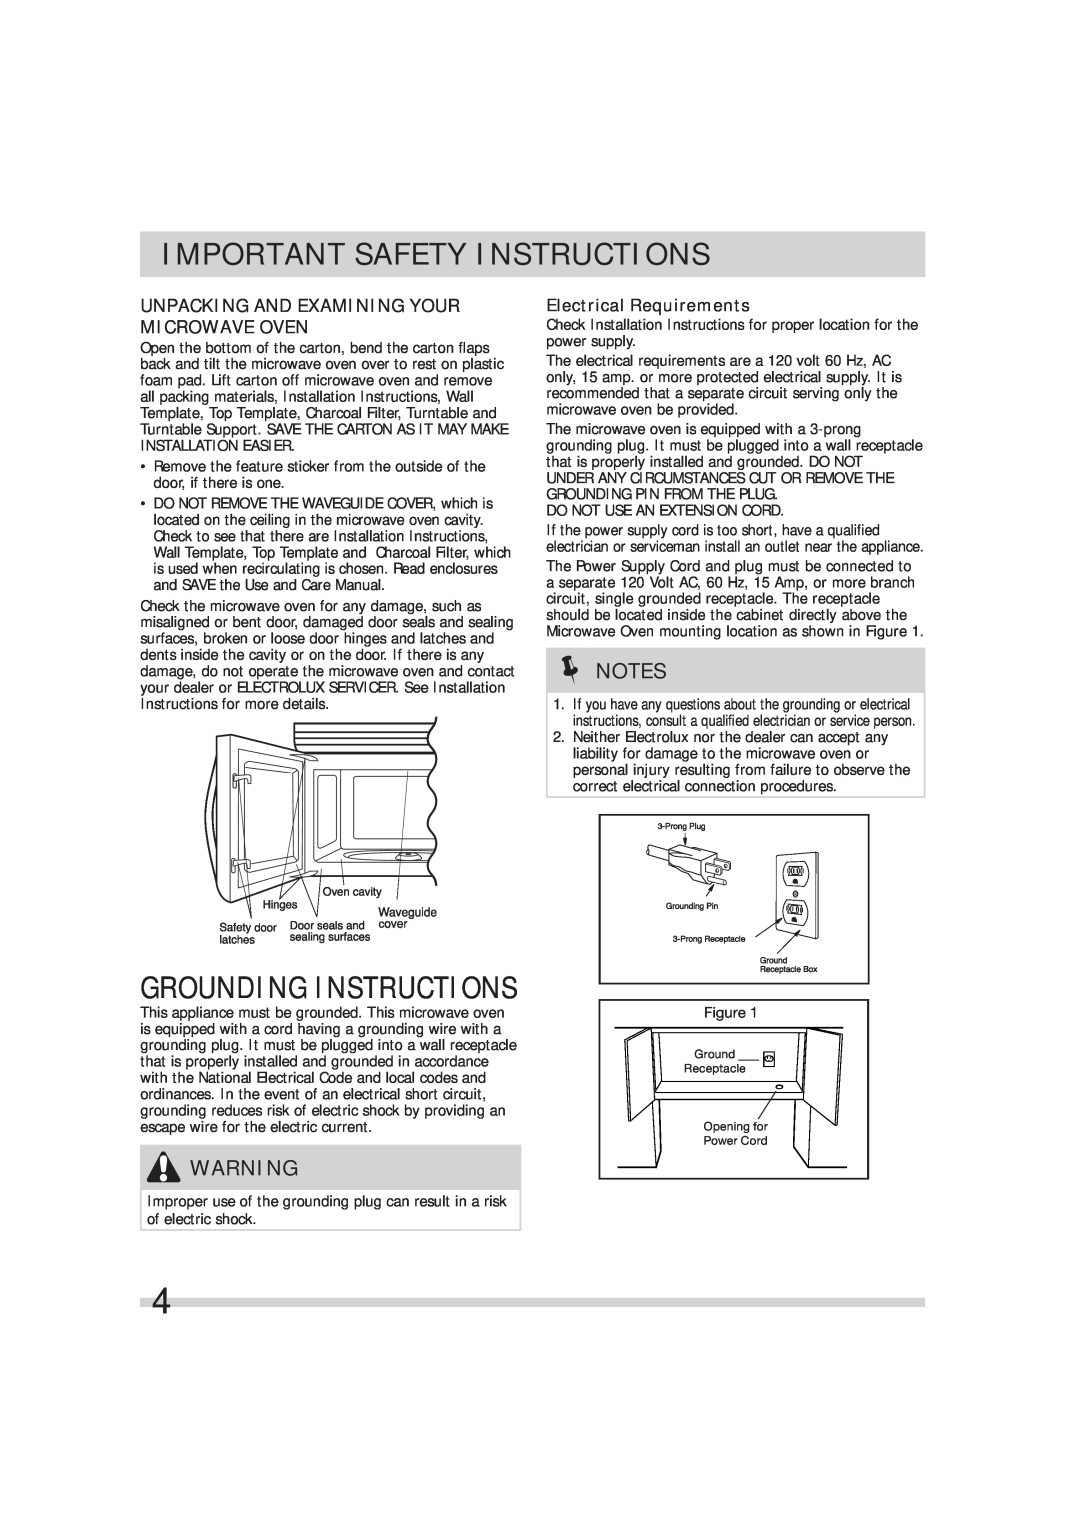 Frigidaire FGMV174KM Unpacking And Examining Your Microwave Oven, Electrical Requirements, Important Safety Instructions 